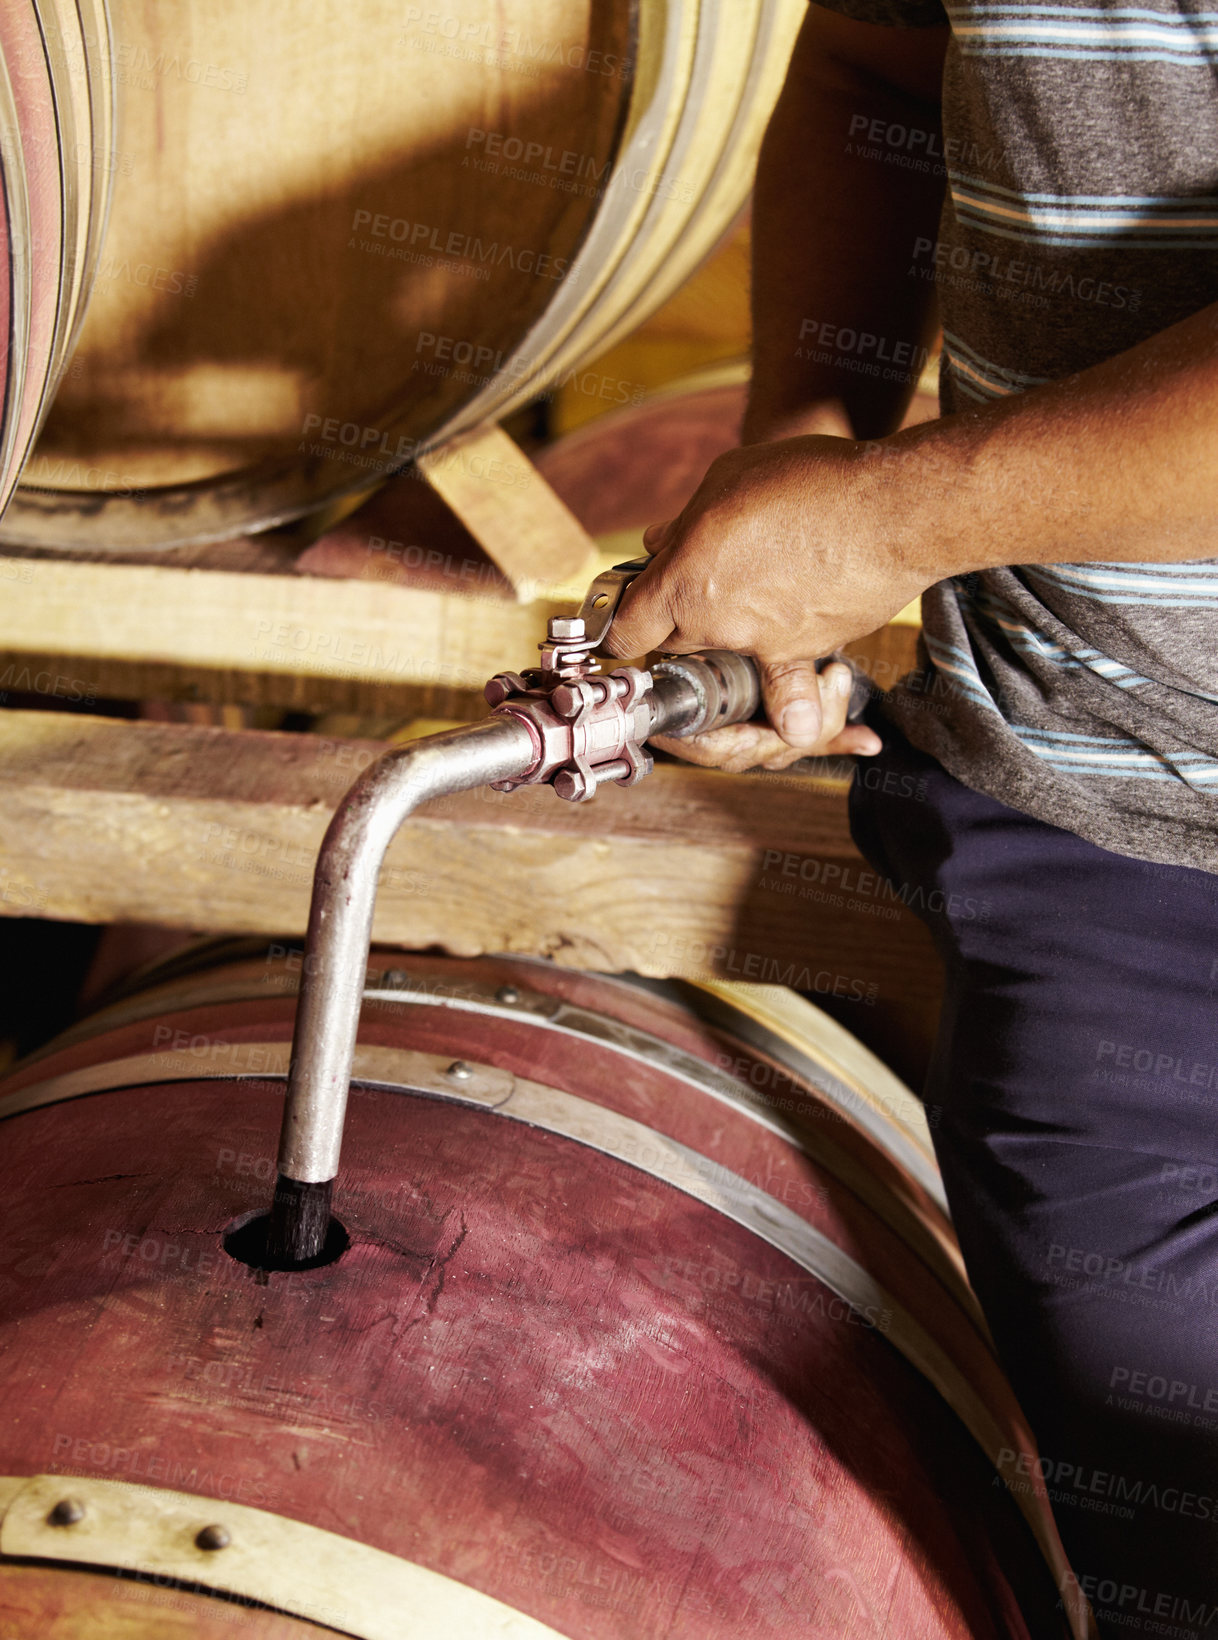 Buy stock photo A man racking a barrel in preparation for bottling wine.  
Closeup of a red wine barrel being refilled with wine by a cellar worker. Winemaker using iron pipe to pour red wine into wooden oak containers